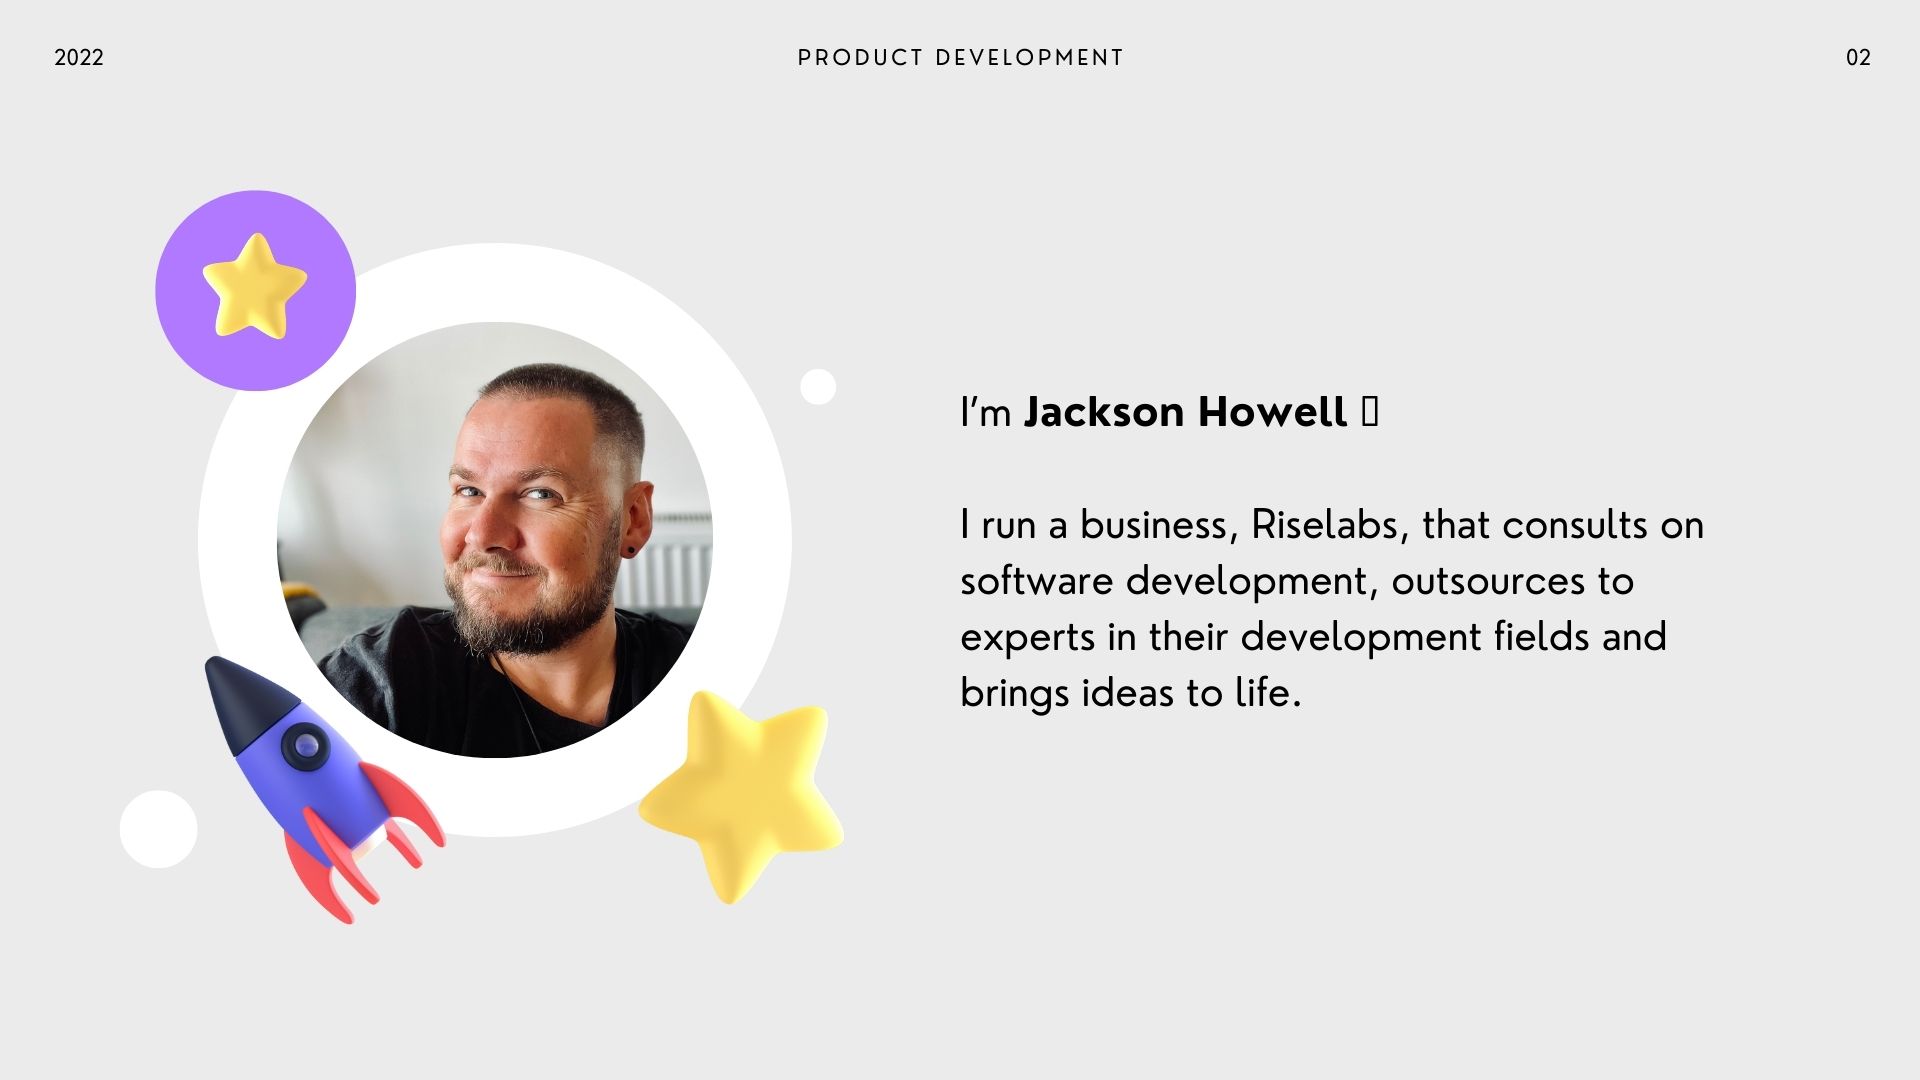 Product development with Jackson Howell